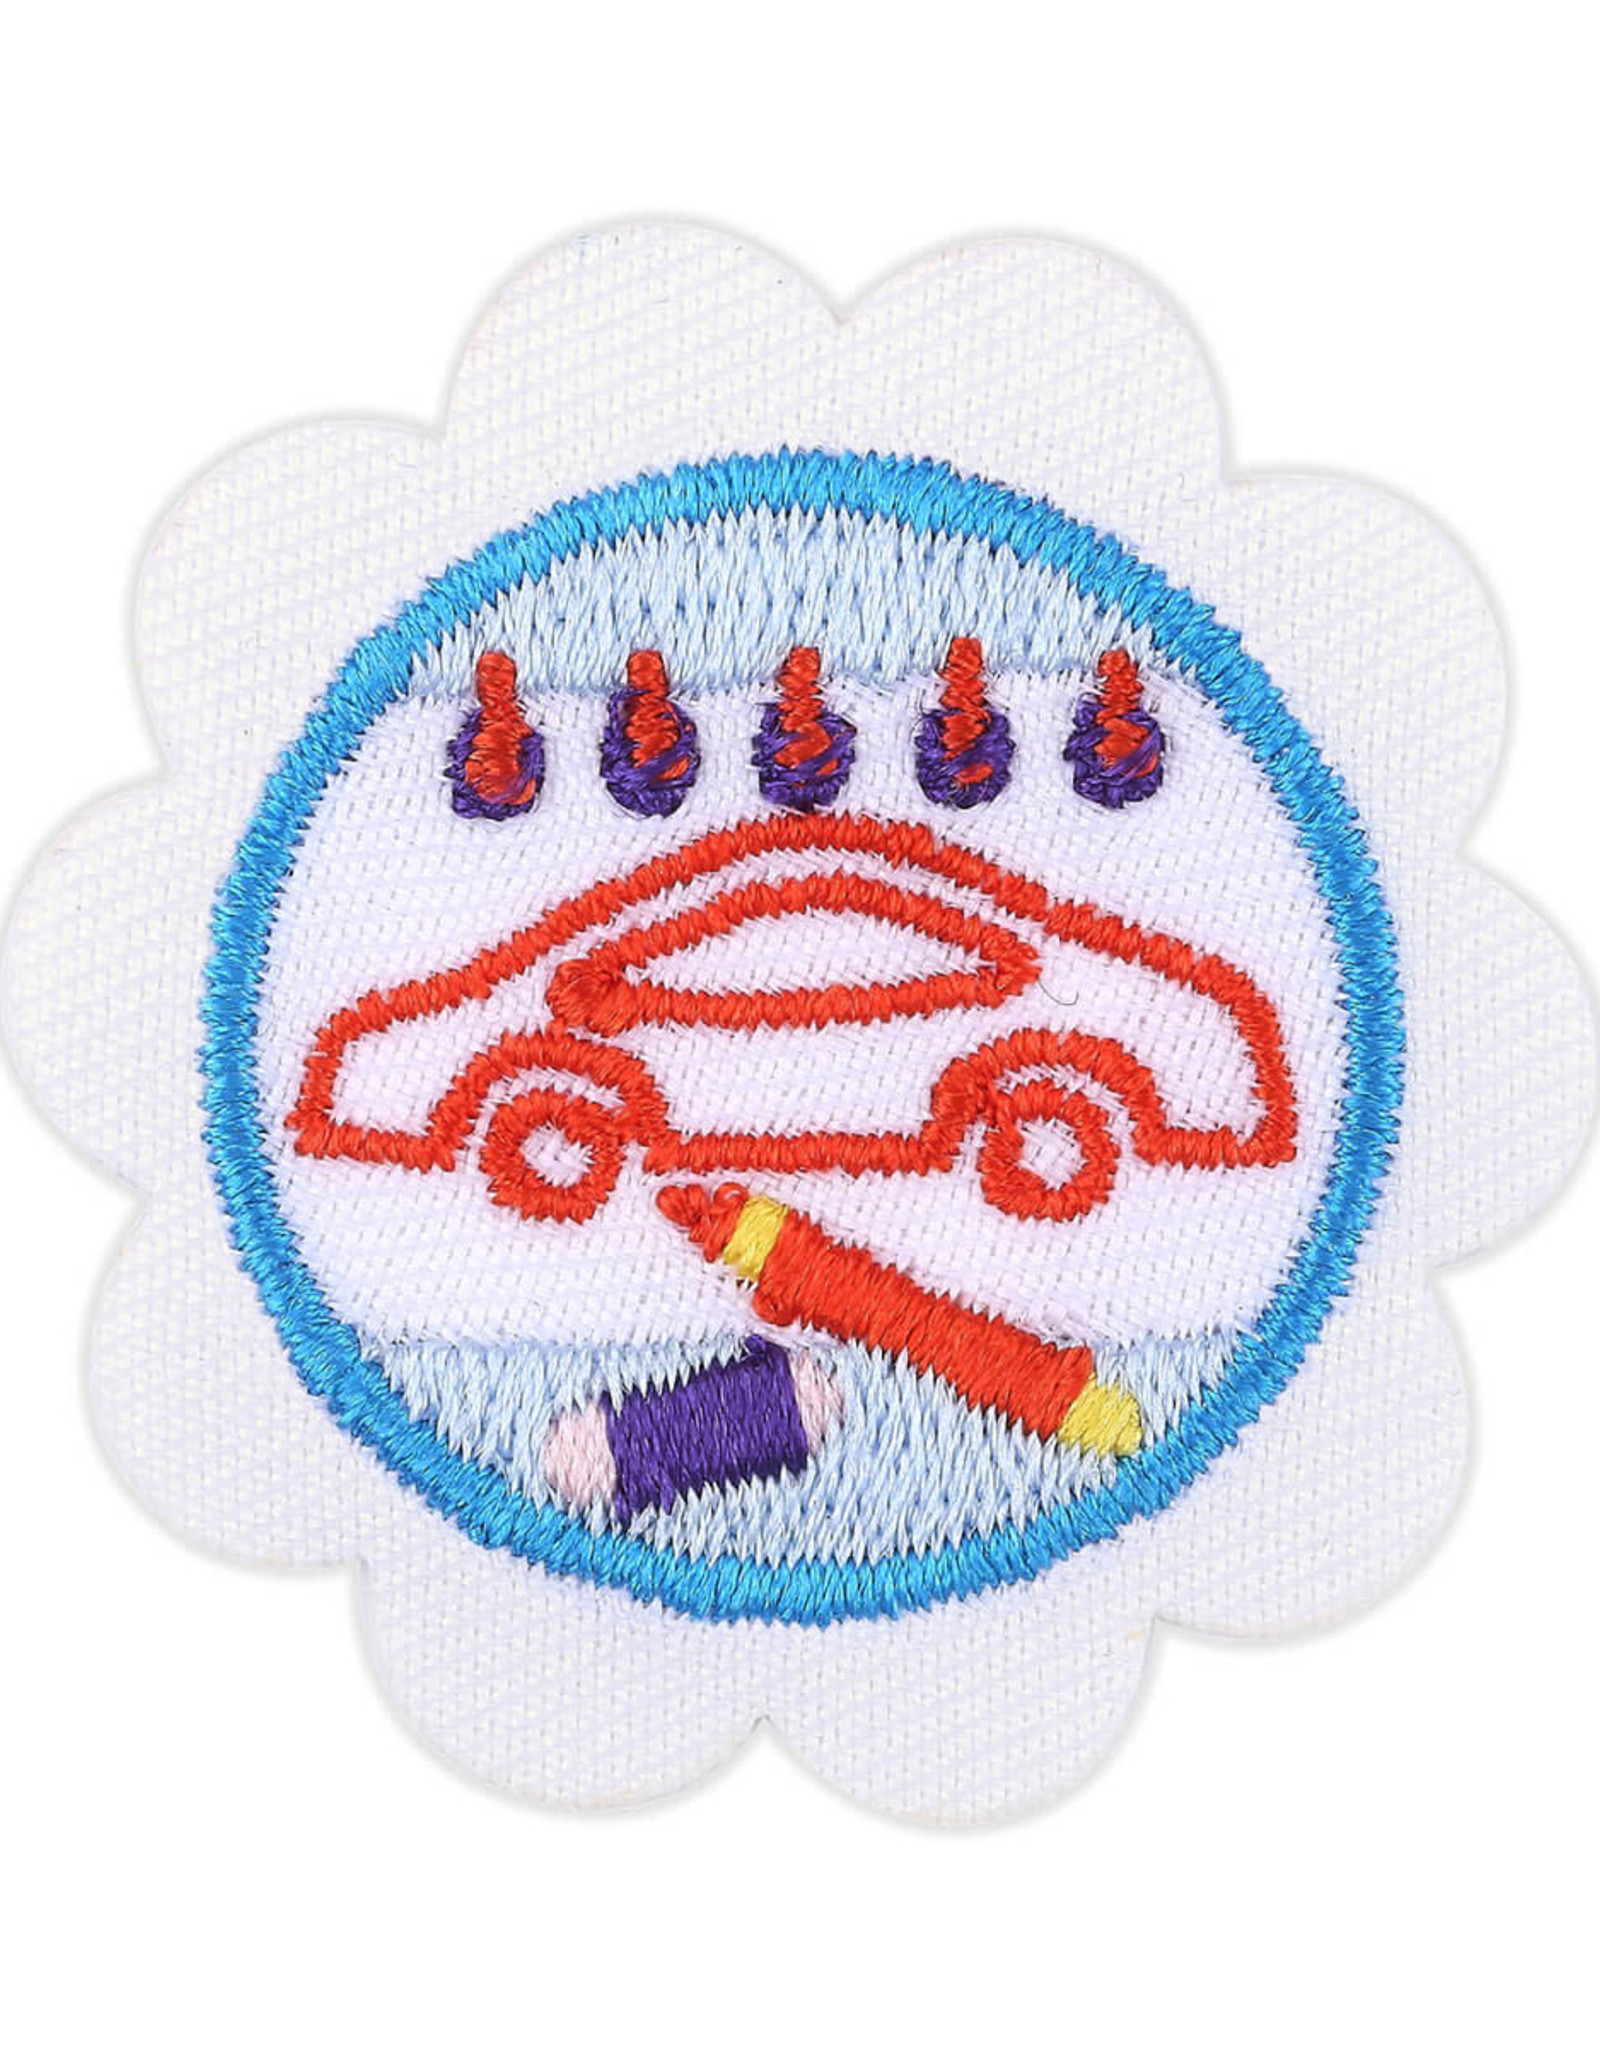 GIRL SCOUTS OF THE USA Daisy Automotive 1: Design Badge